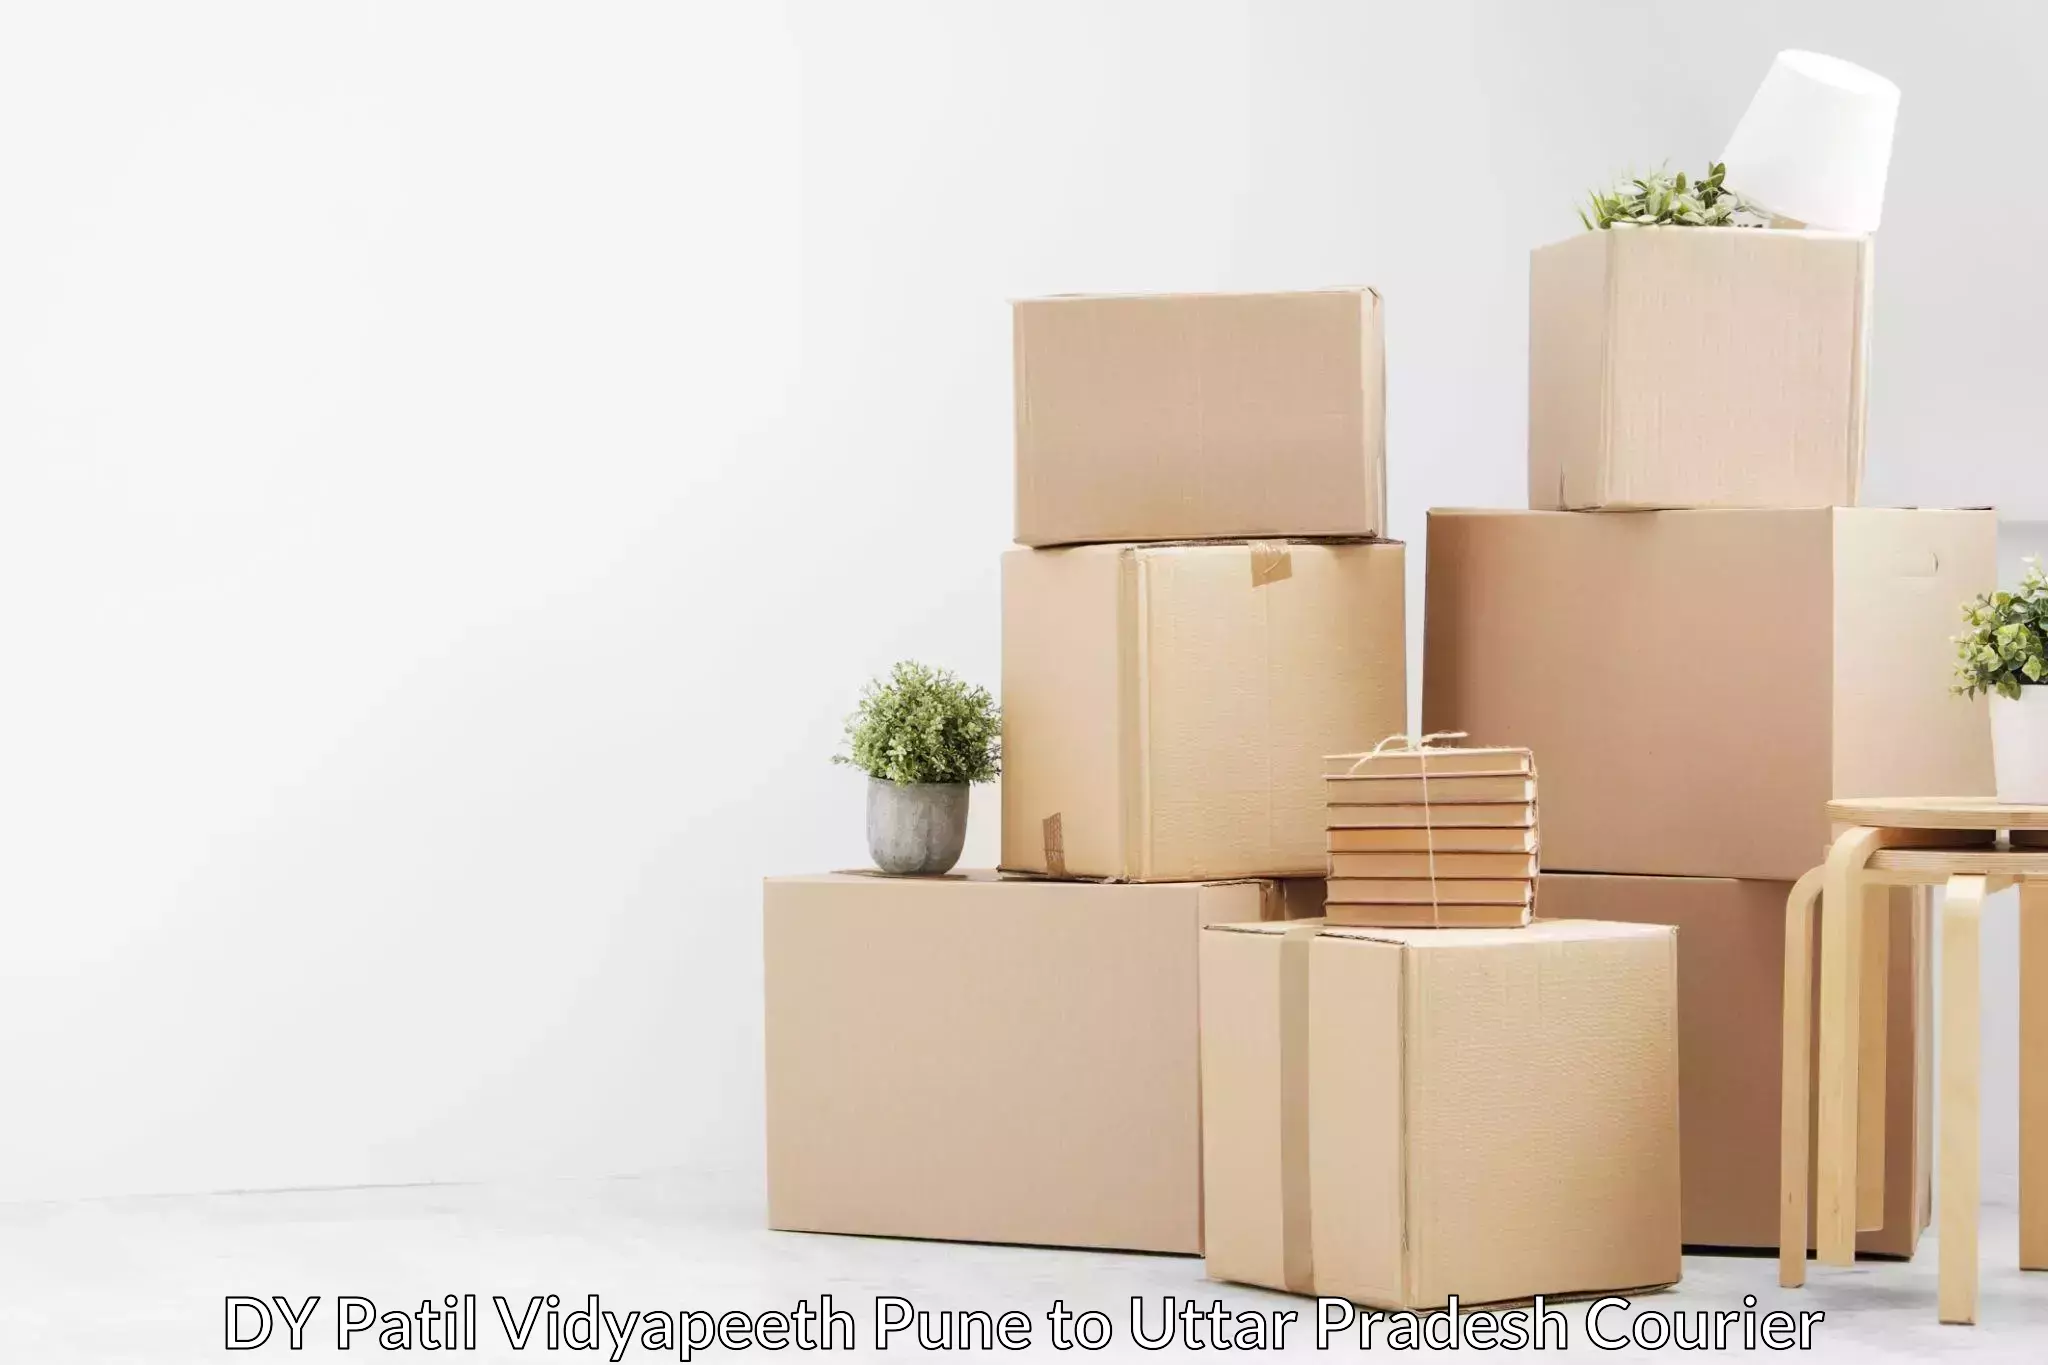 Professional furniture transport DY Patil Vidyapeeth Pune to Tulsipur